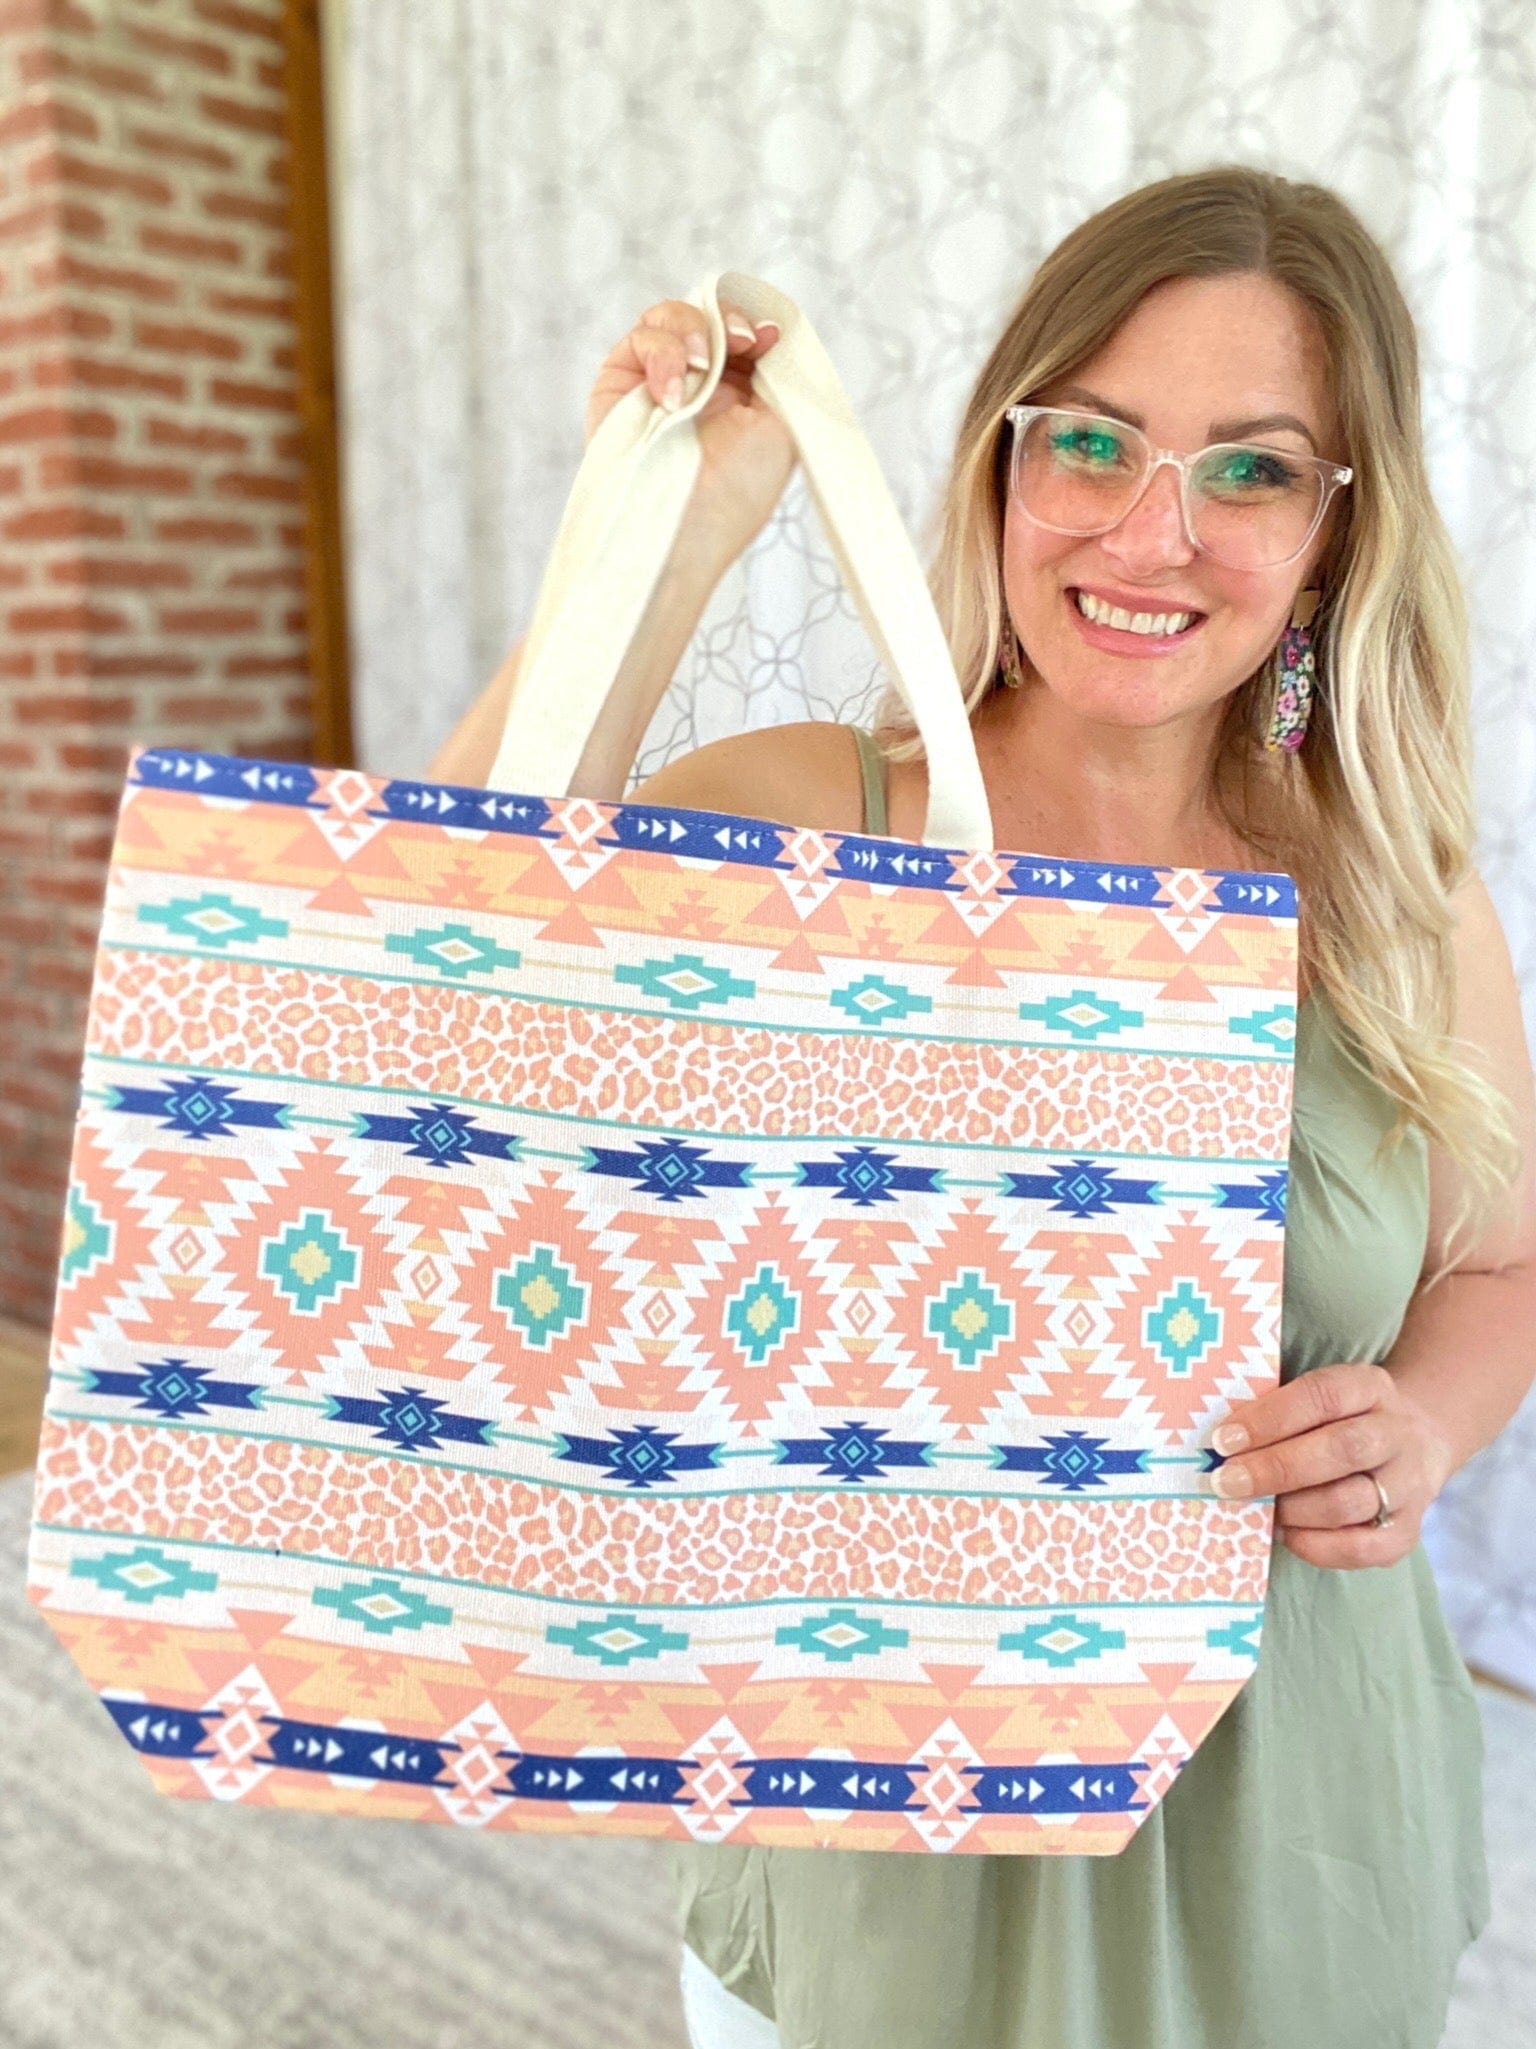 Come with Me Tote-Urbanista-Stay Foxy Boutique, Florissant, Missouri